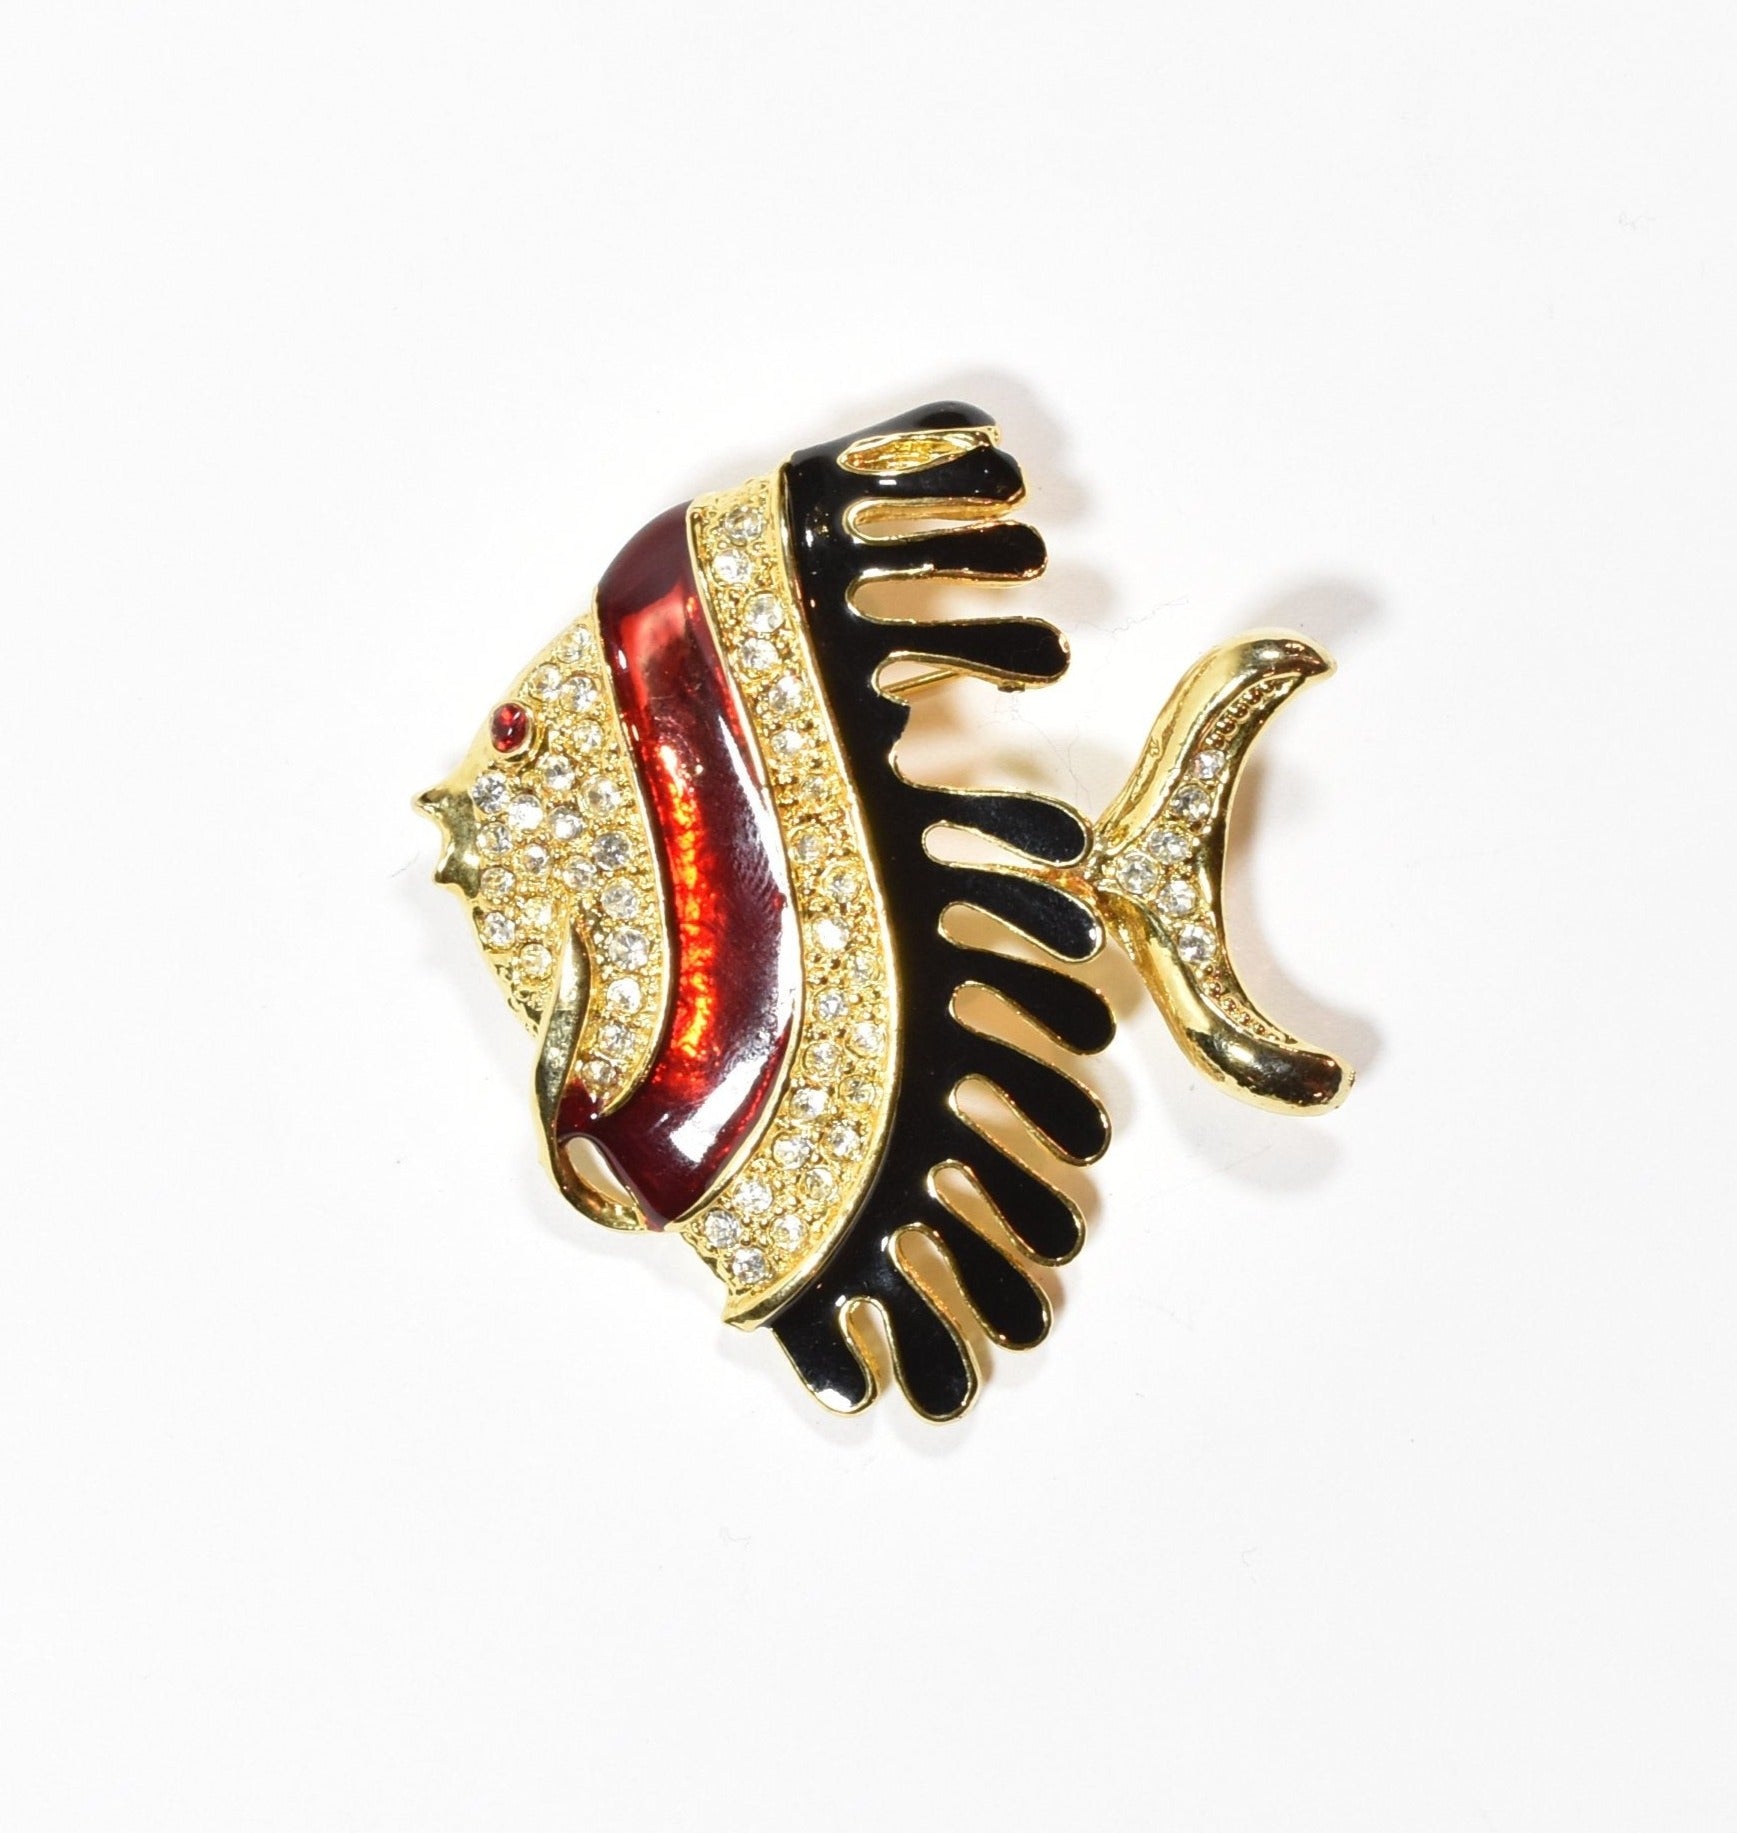 Brooch Pin Fish Gold and red BROKE Latch Used 2 inch